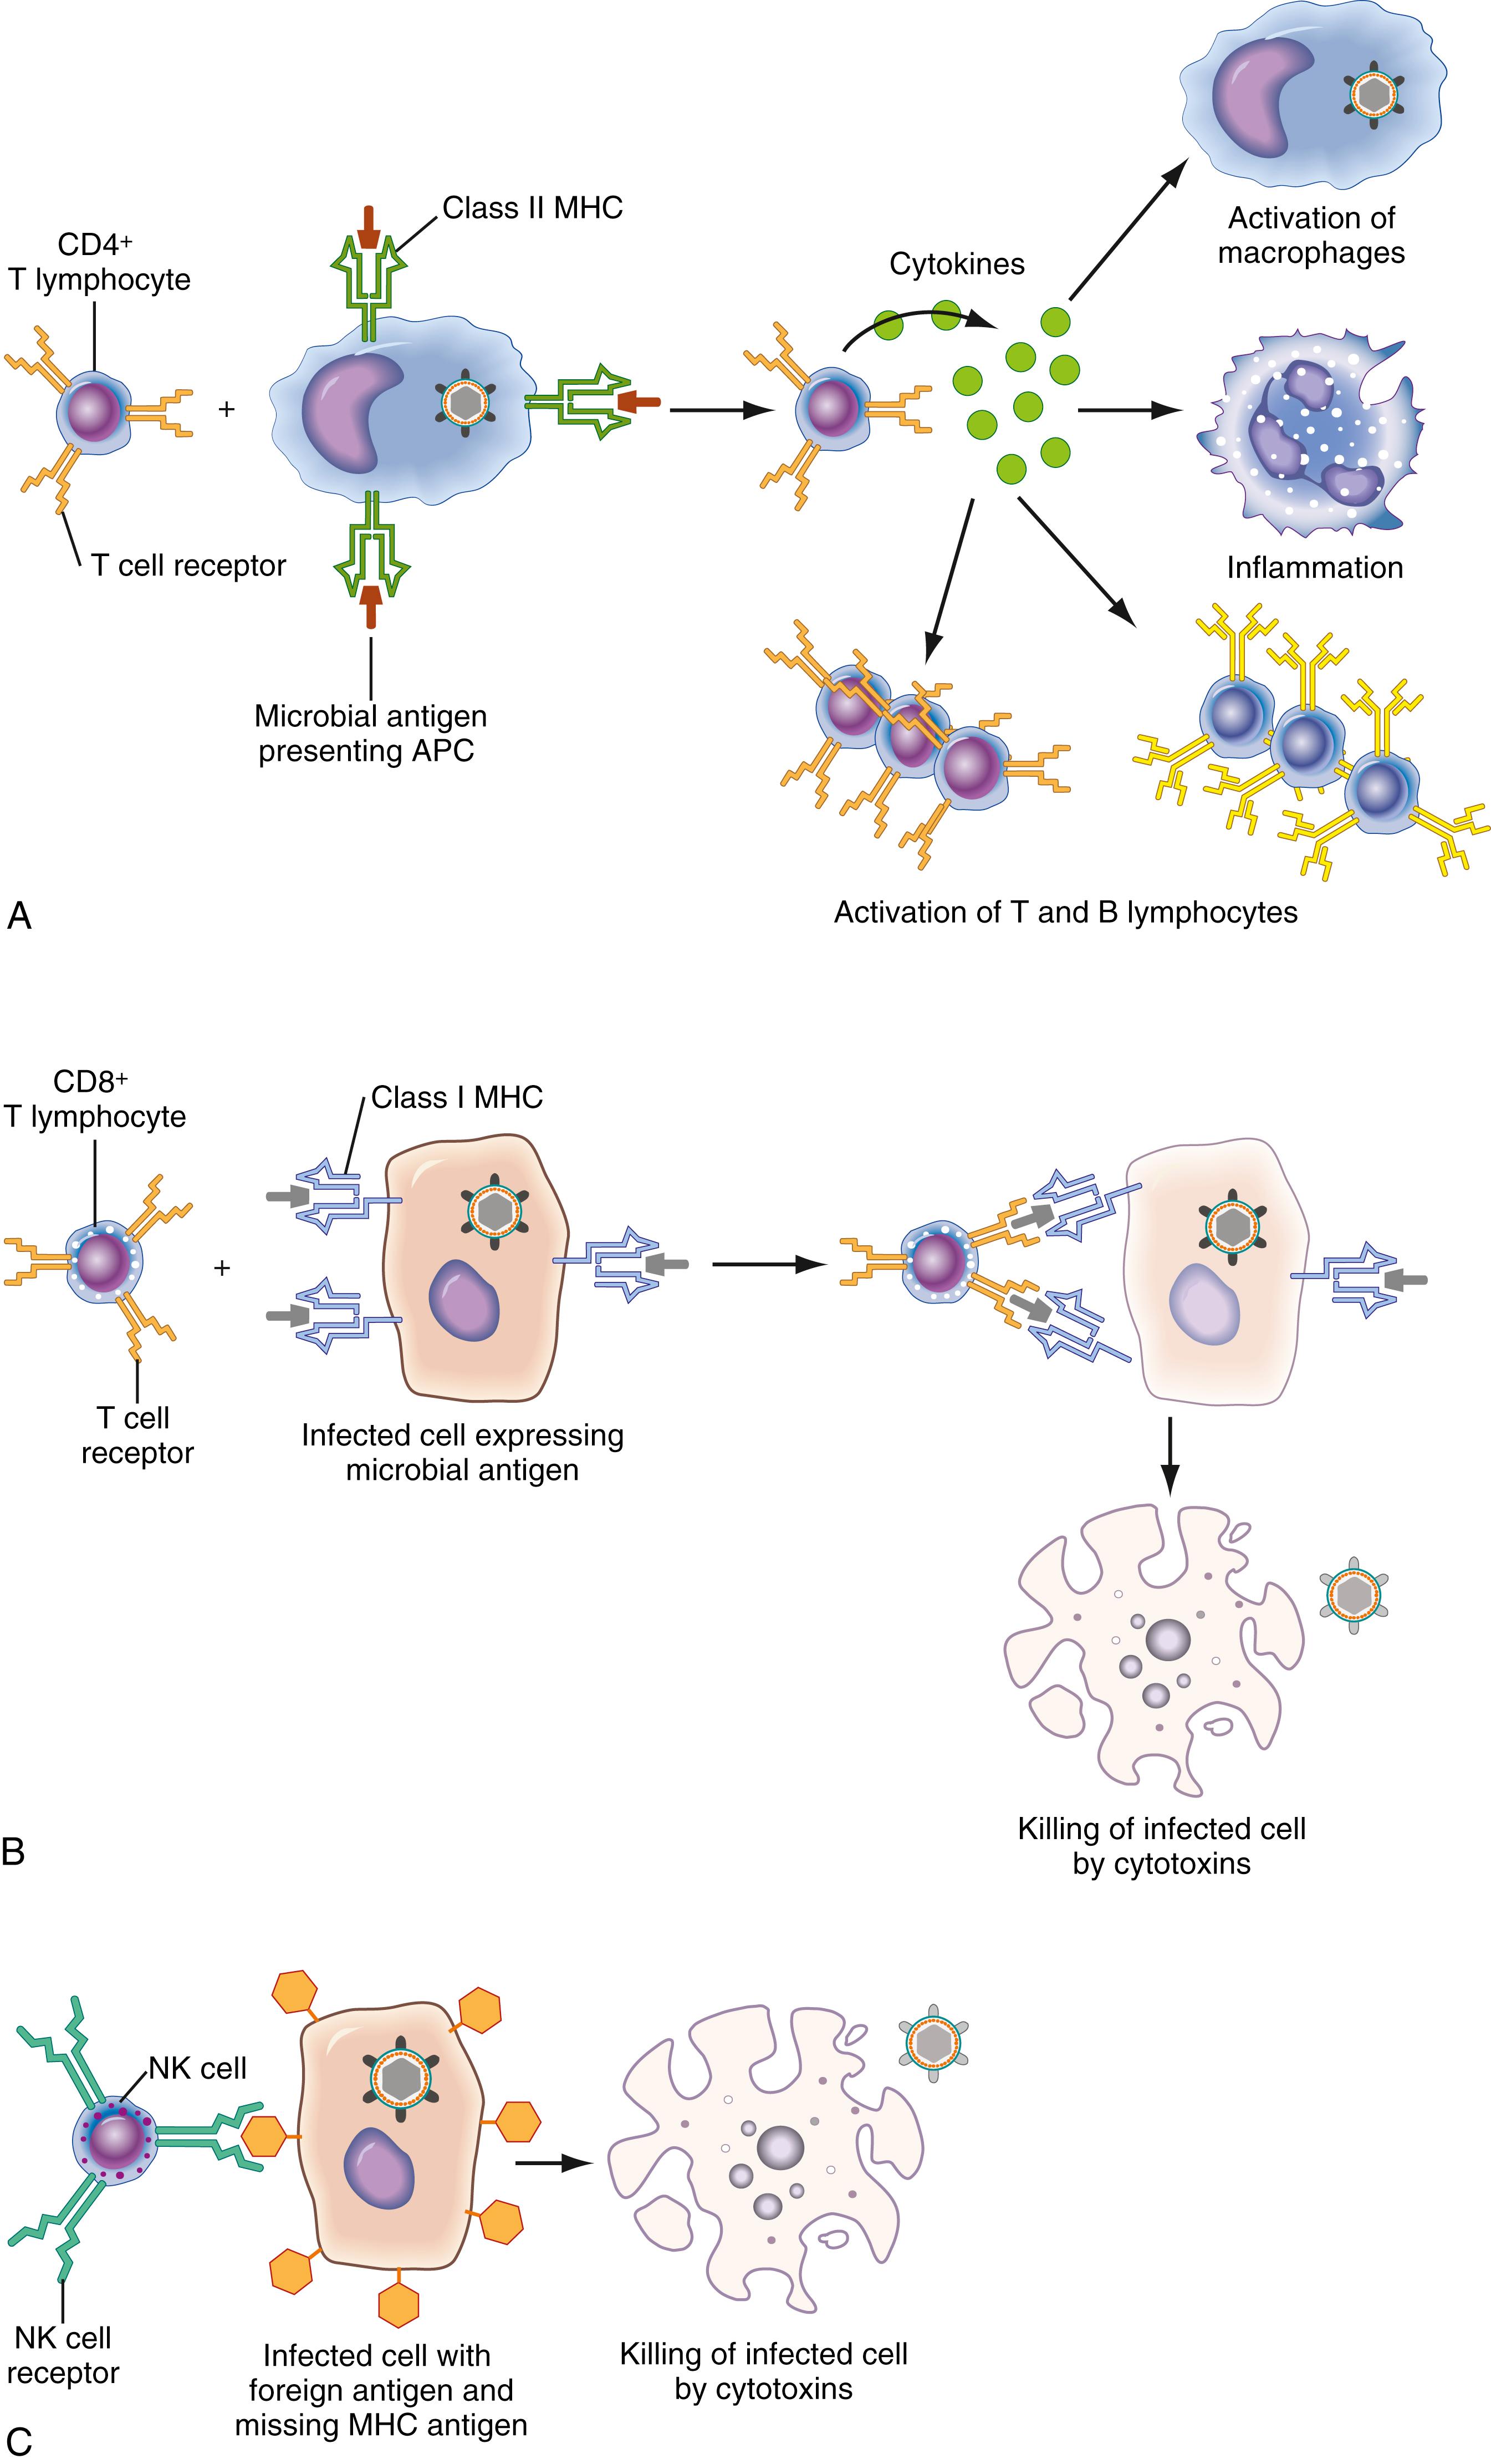 Figure 46.1, A schematic illustration of immune cell function. A, Function of helper T lymphocytes. Helper T cells are activated by contact with an antigen-processing cell (APC) that has ingested and processed a foreign or altered self substance and displays processed antigen fragments bound to a class II self–major histocompatibility complex (MHC) receptor. Simultaneous binding of the T-cell receptor complex (TCR) in conjunction with a CD4 coreceptor activates the T cell primarily through a complex signaling mechanism involving the SRC kinase family. The activated T cell coordinates the immune response by secreting cytokines that have a multitude of effects, including recruitment and activation of macrophages, activation of the inflammatory system, and activation of cytotoxic T lymphocytes and other helper T lymphocytes. B, Function of cytotoxic T lymphocytes. Cytotoxic, CD8-positive cells are activated primarily by contact with infected, damaged, dysplastic, or neoplastic self-cells expressing processed microbial or abnormal self-antigens bound to the class I MHC. Activation of the cell occurs via the TCR in conjunction with the CD8 coreceptor that is specific for the class I MHC. The target cell is killed by the release of cytotoxic chemicals, including perforin, granzymes, and granulysin. C, Function of natural killer (NK) cells. NK cells are activated by cytokines or interferons and directly recognize “missing-self” virally infected or tumor cells that have only low levels of MHC I self-antigen. Unlike cytotoxic T cells, prior sensitization is not required. Killing of the target cell occurs via the release of cytotoxic chemicals, similar to cytotoxic T lymphocytes.